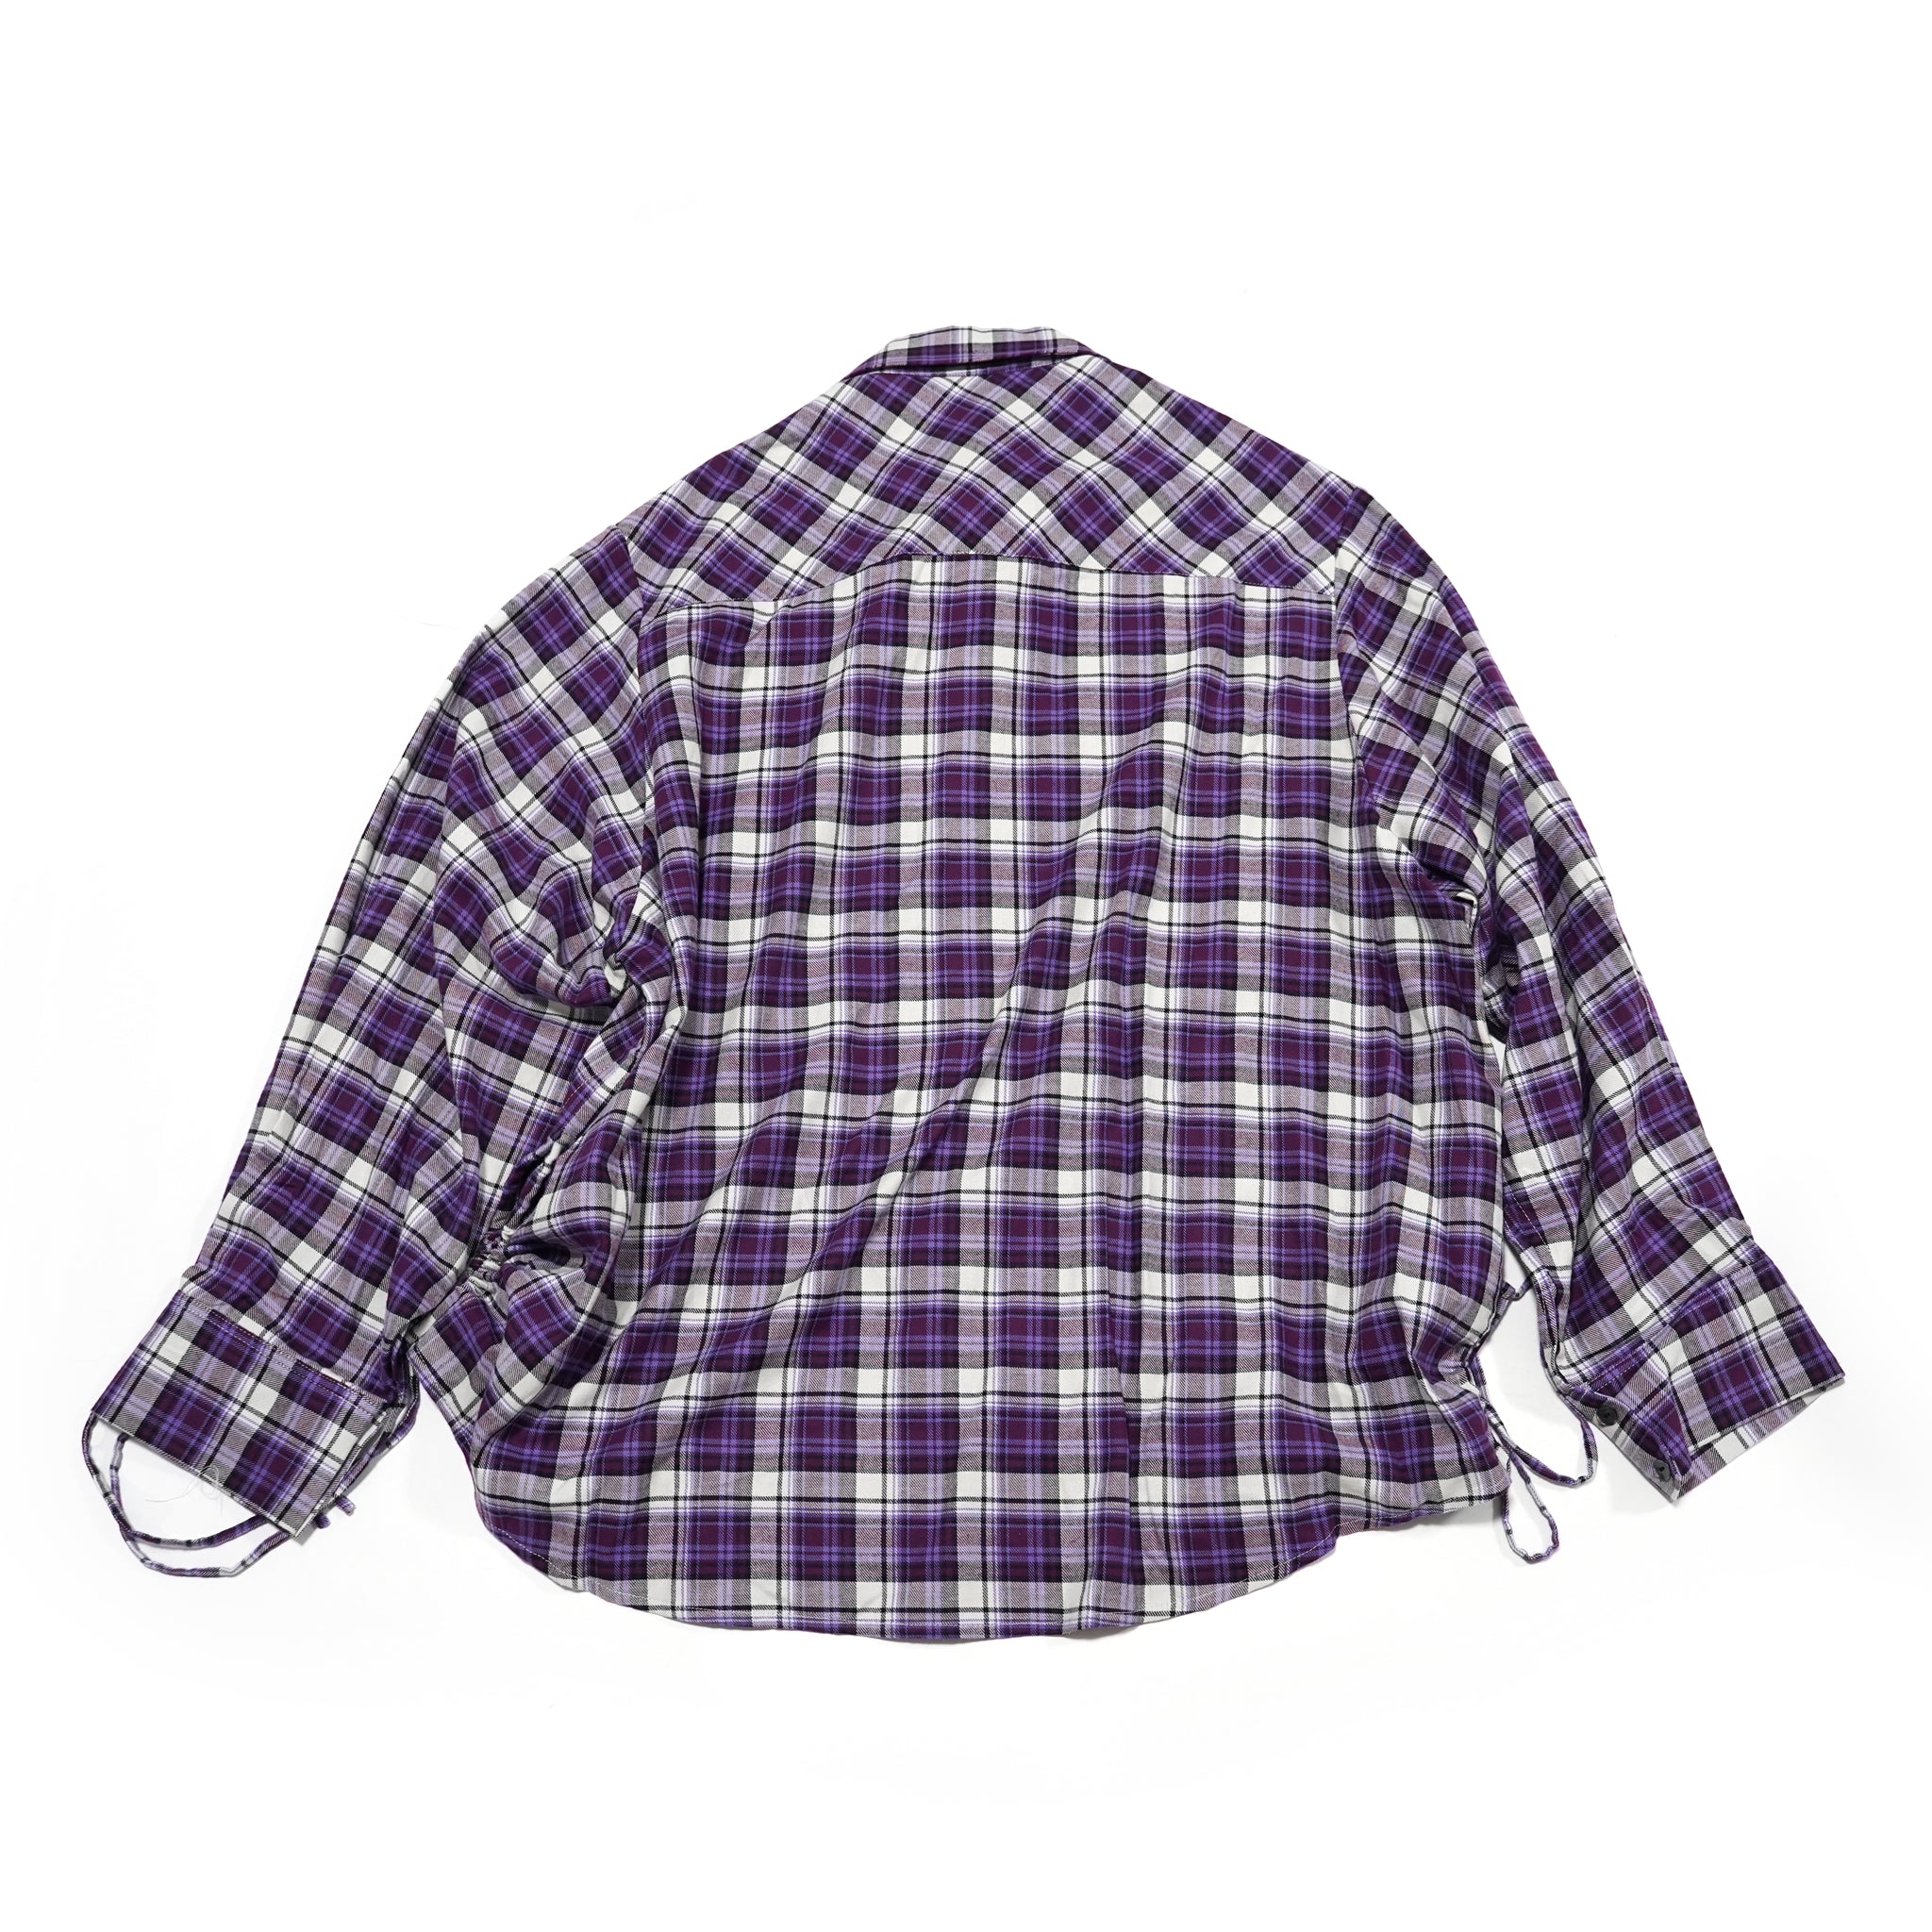 No:pw21t01 | Name:OVERSIZED SPLICED FLANNEL SHIRT | Color:Purple | Size:Free【PLATEAU STUDIO_プラトー スタジオ】